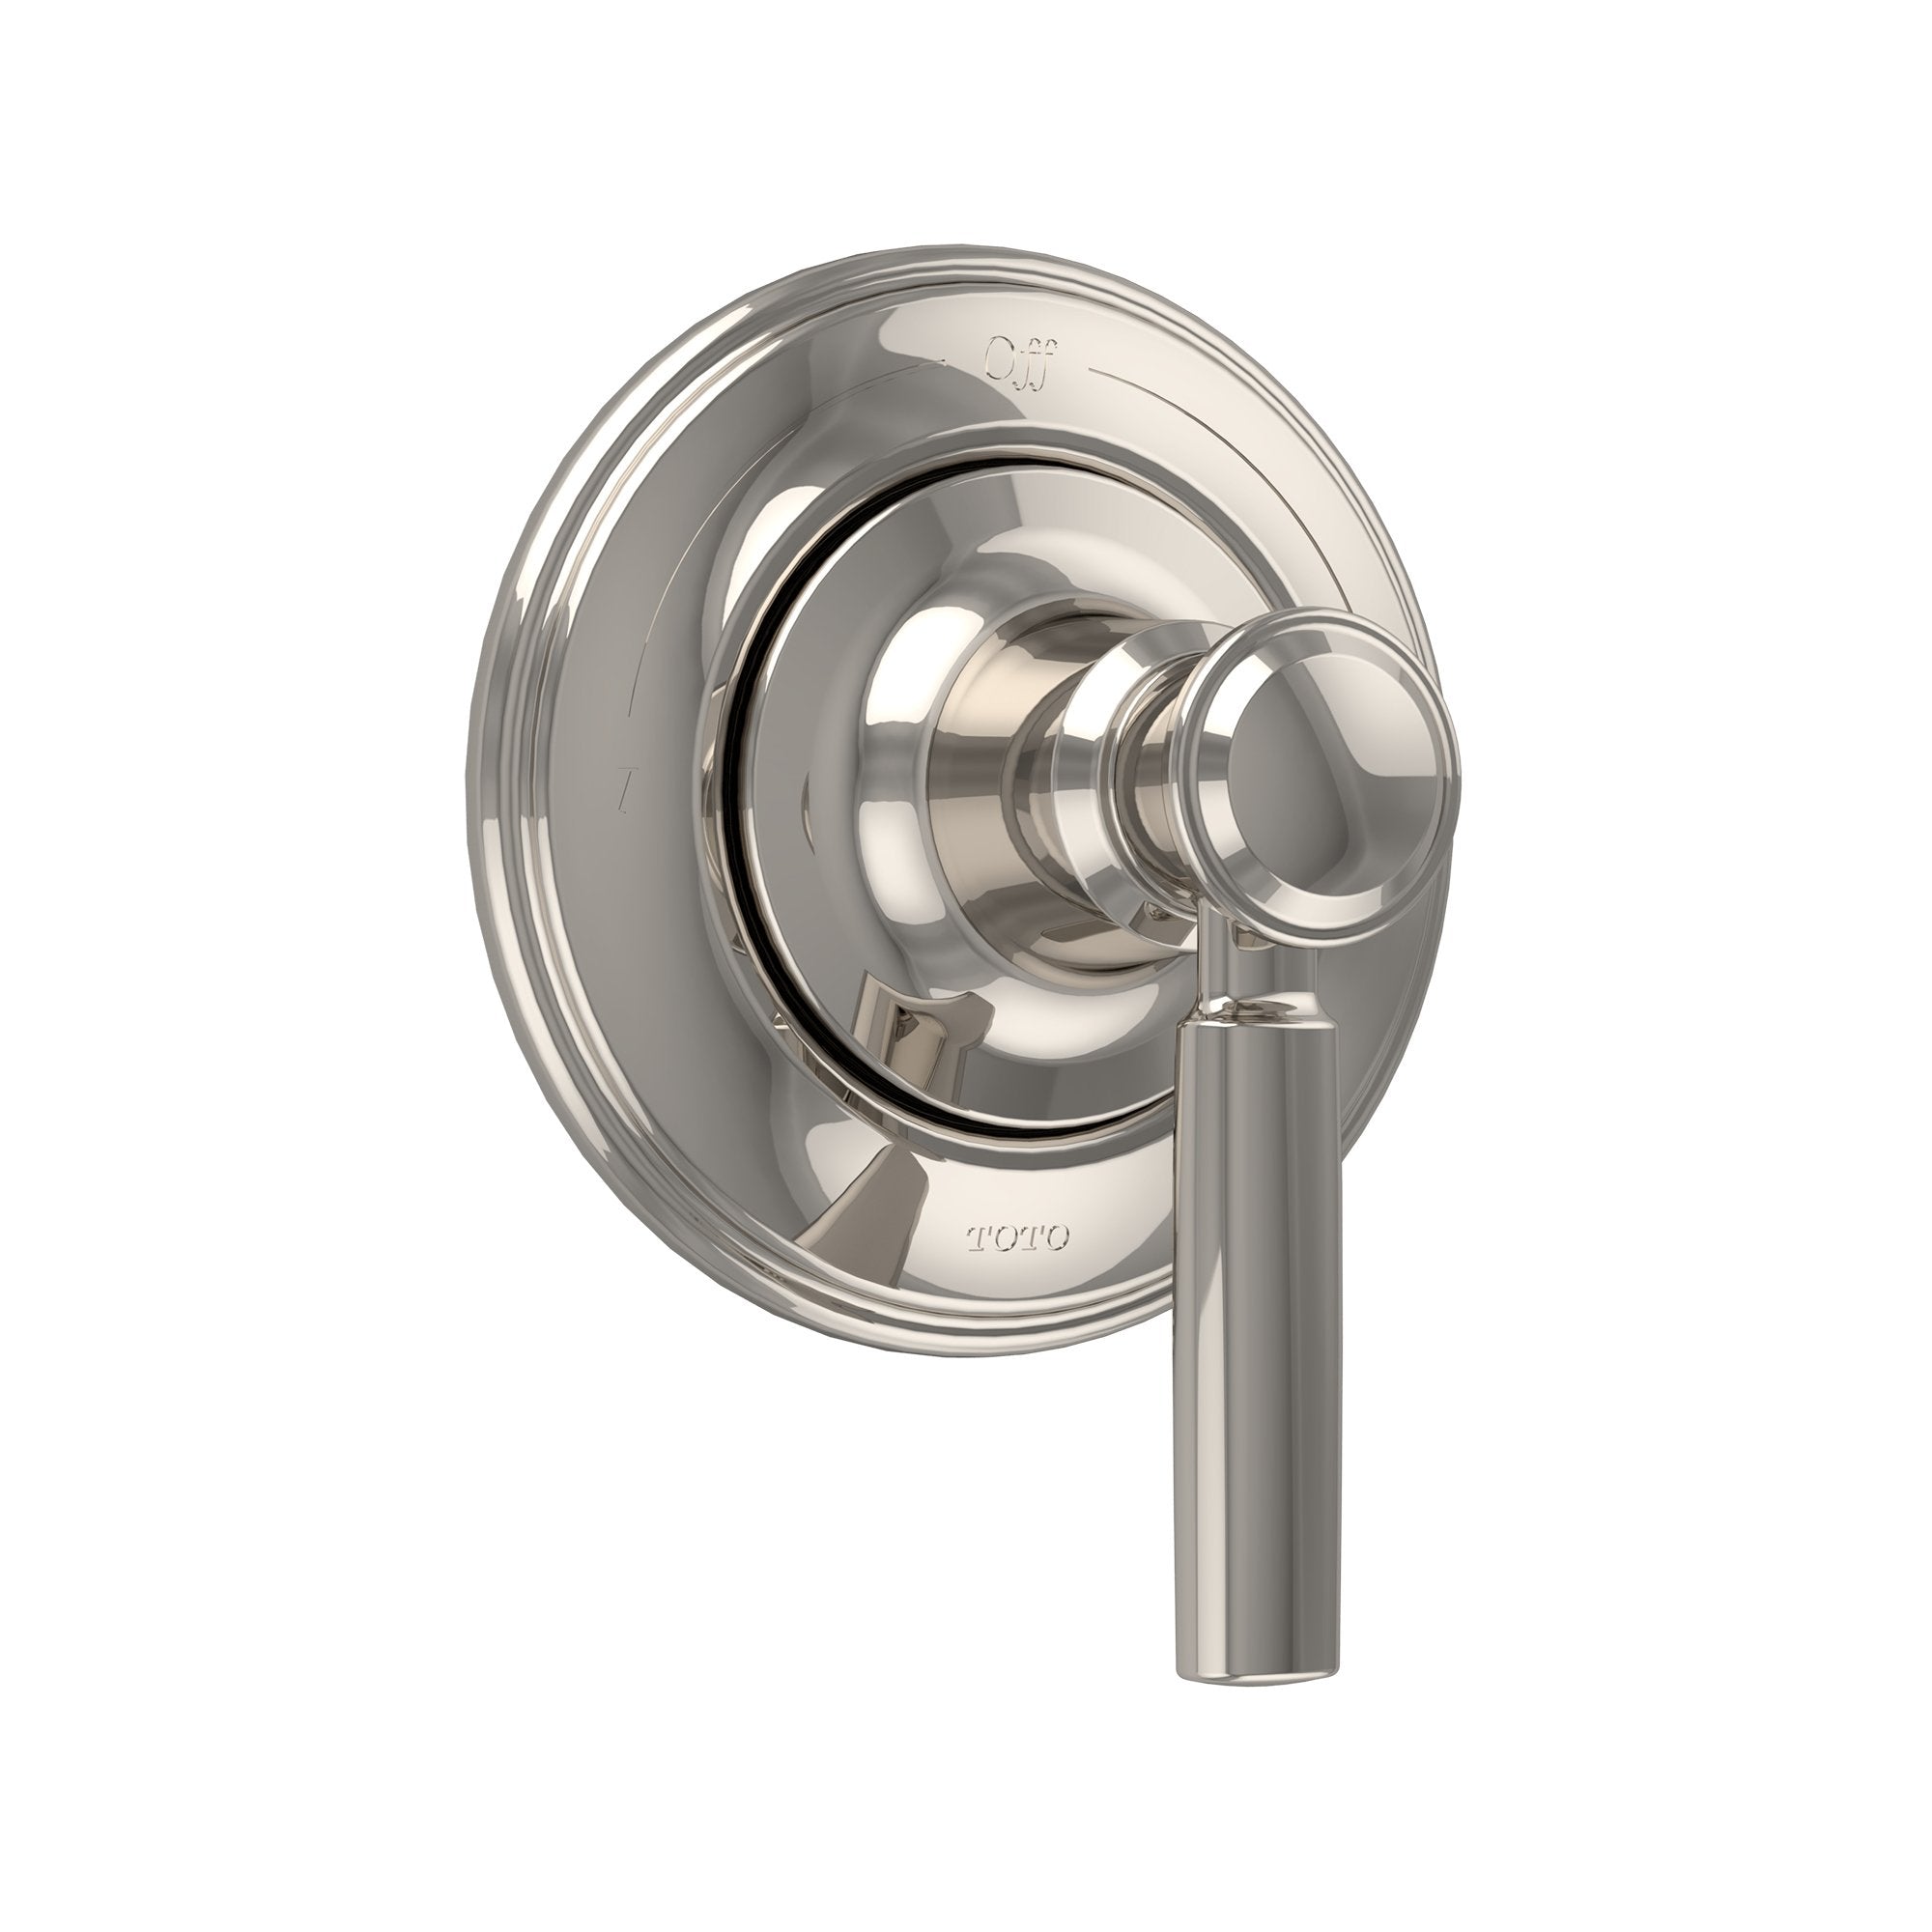 TOTO, TOTO Keane Two-Way Diverter Trim with Off, Polished Nickel TS211D#PN